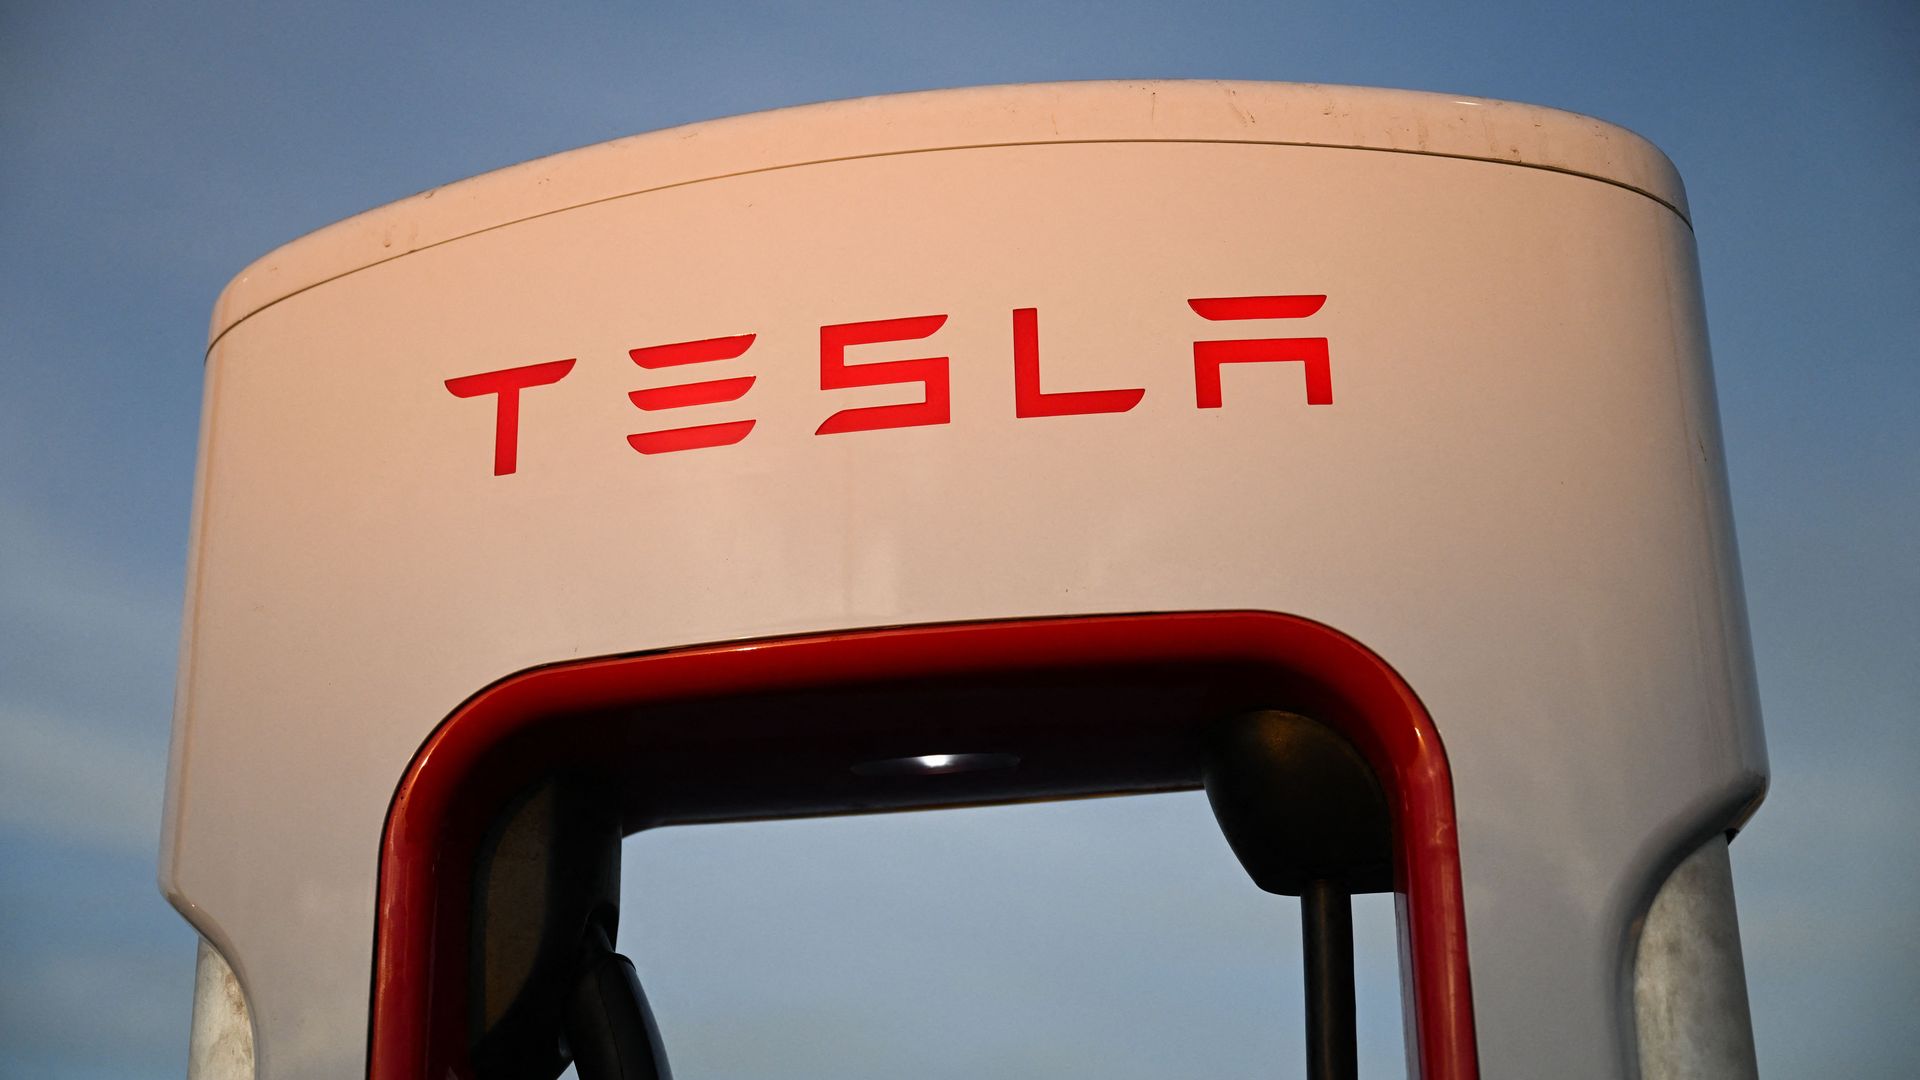 The Tesla, Inc. electric vehicle logo is displayed on a charging bay 